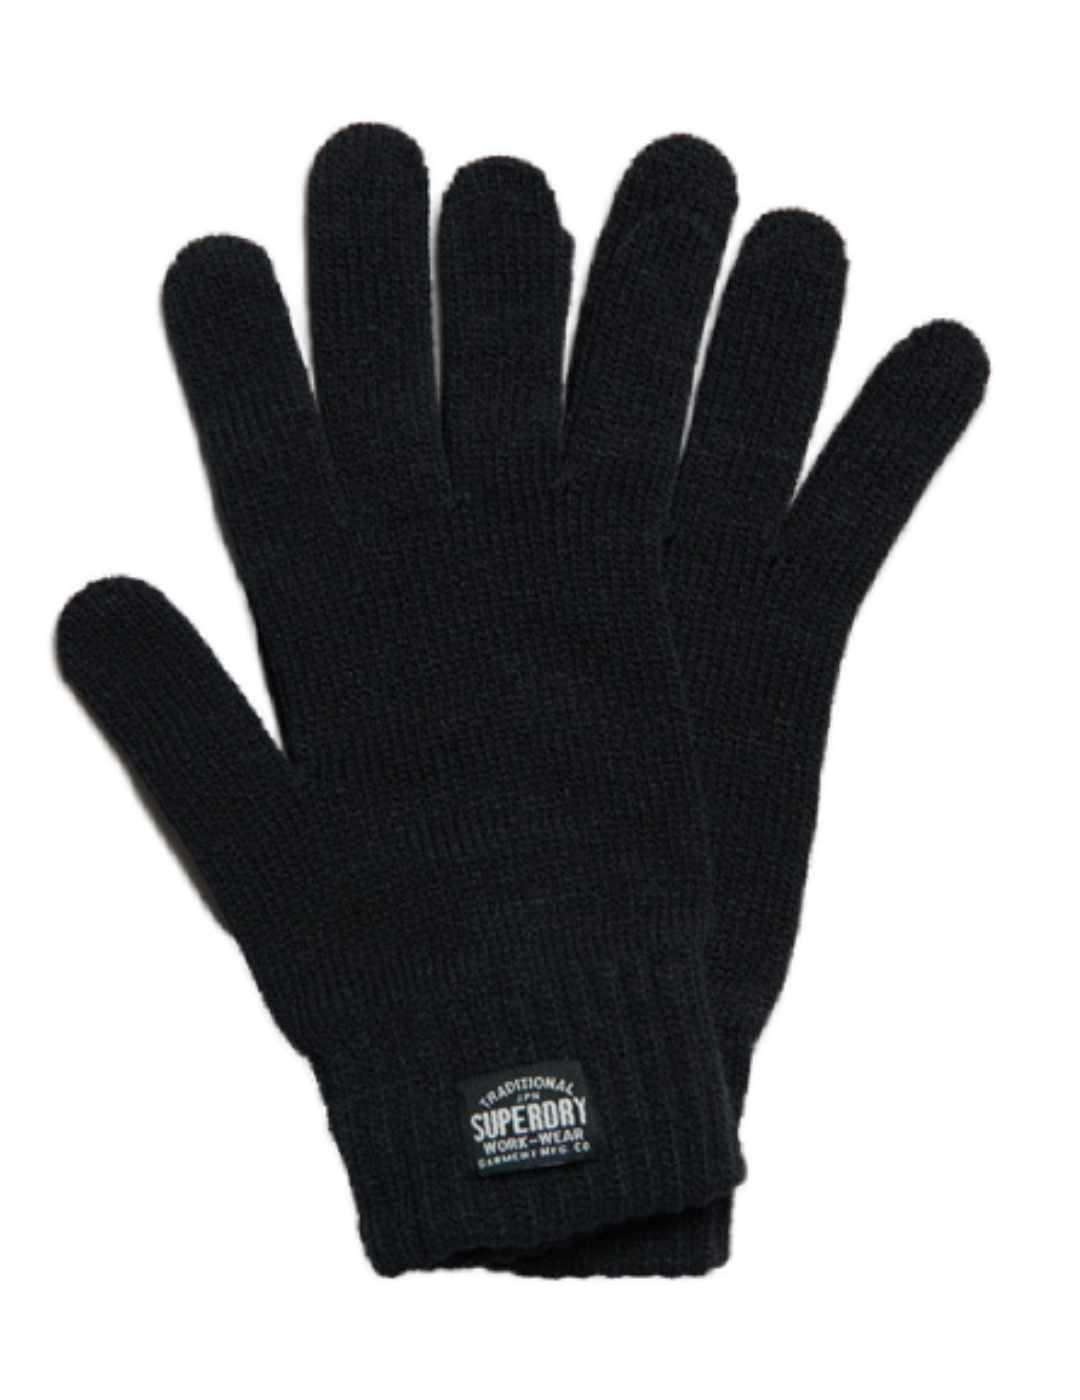 Guantes Superdry Classic negro con parche para mujer